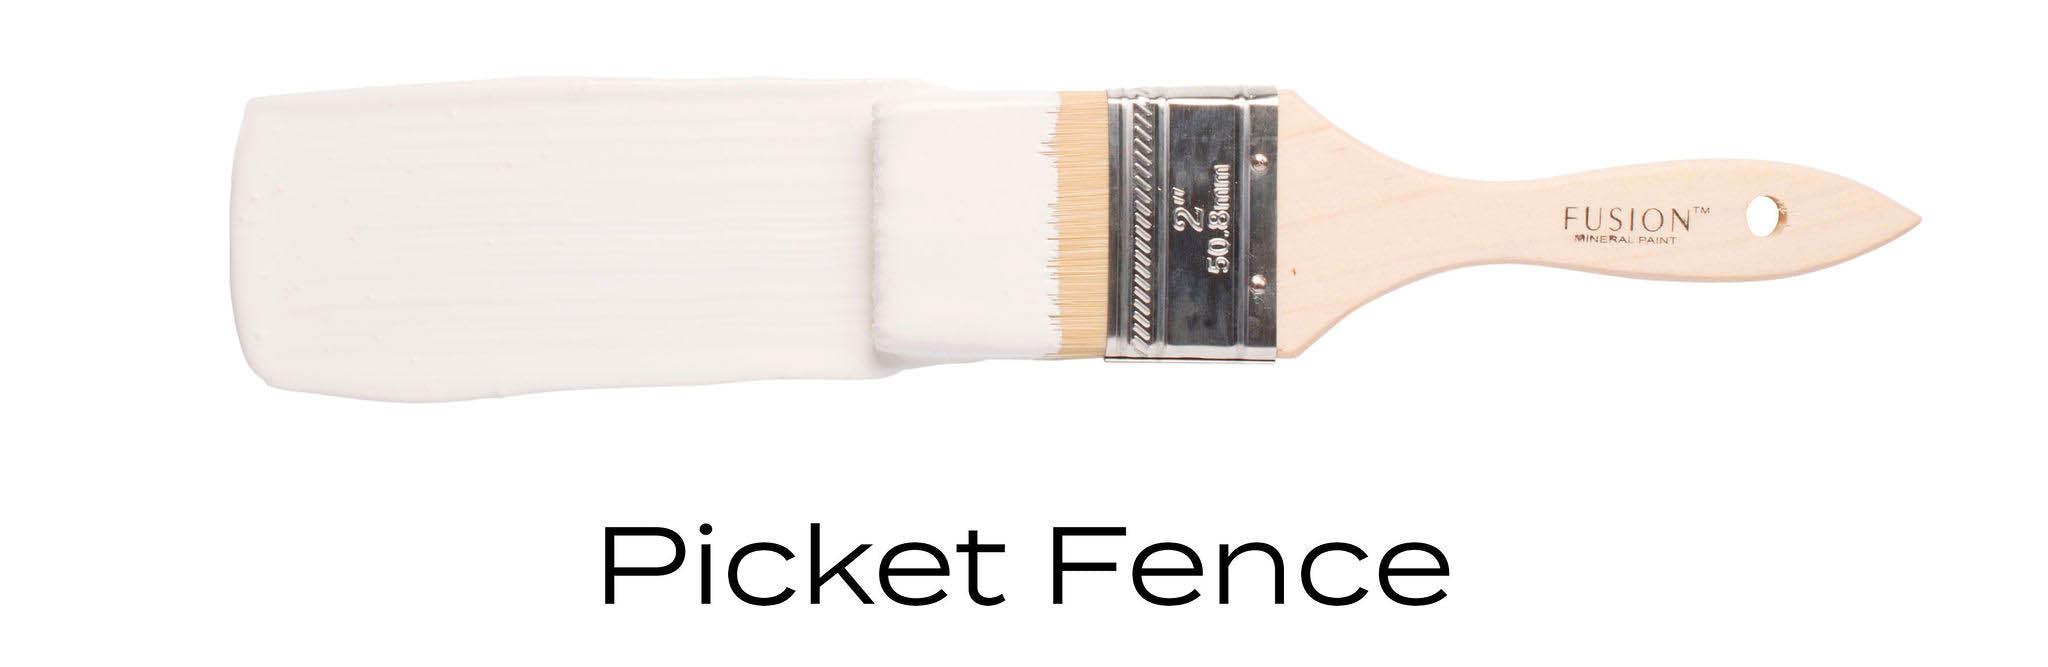 Picket Fence Fusion Mineral Paint Furniture Paint Colour Example, No Prep or top coat needed, UK Stockist